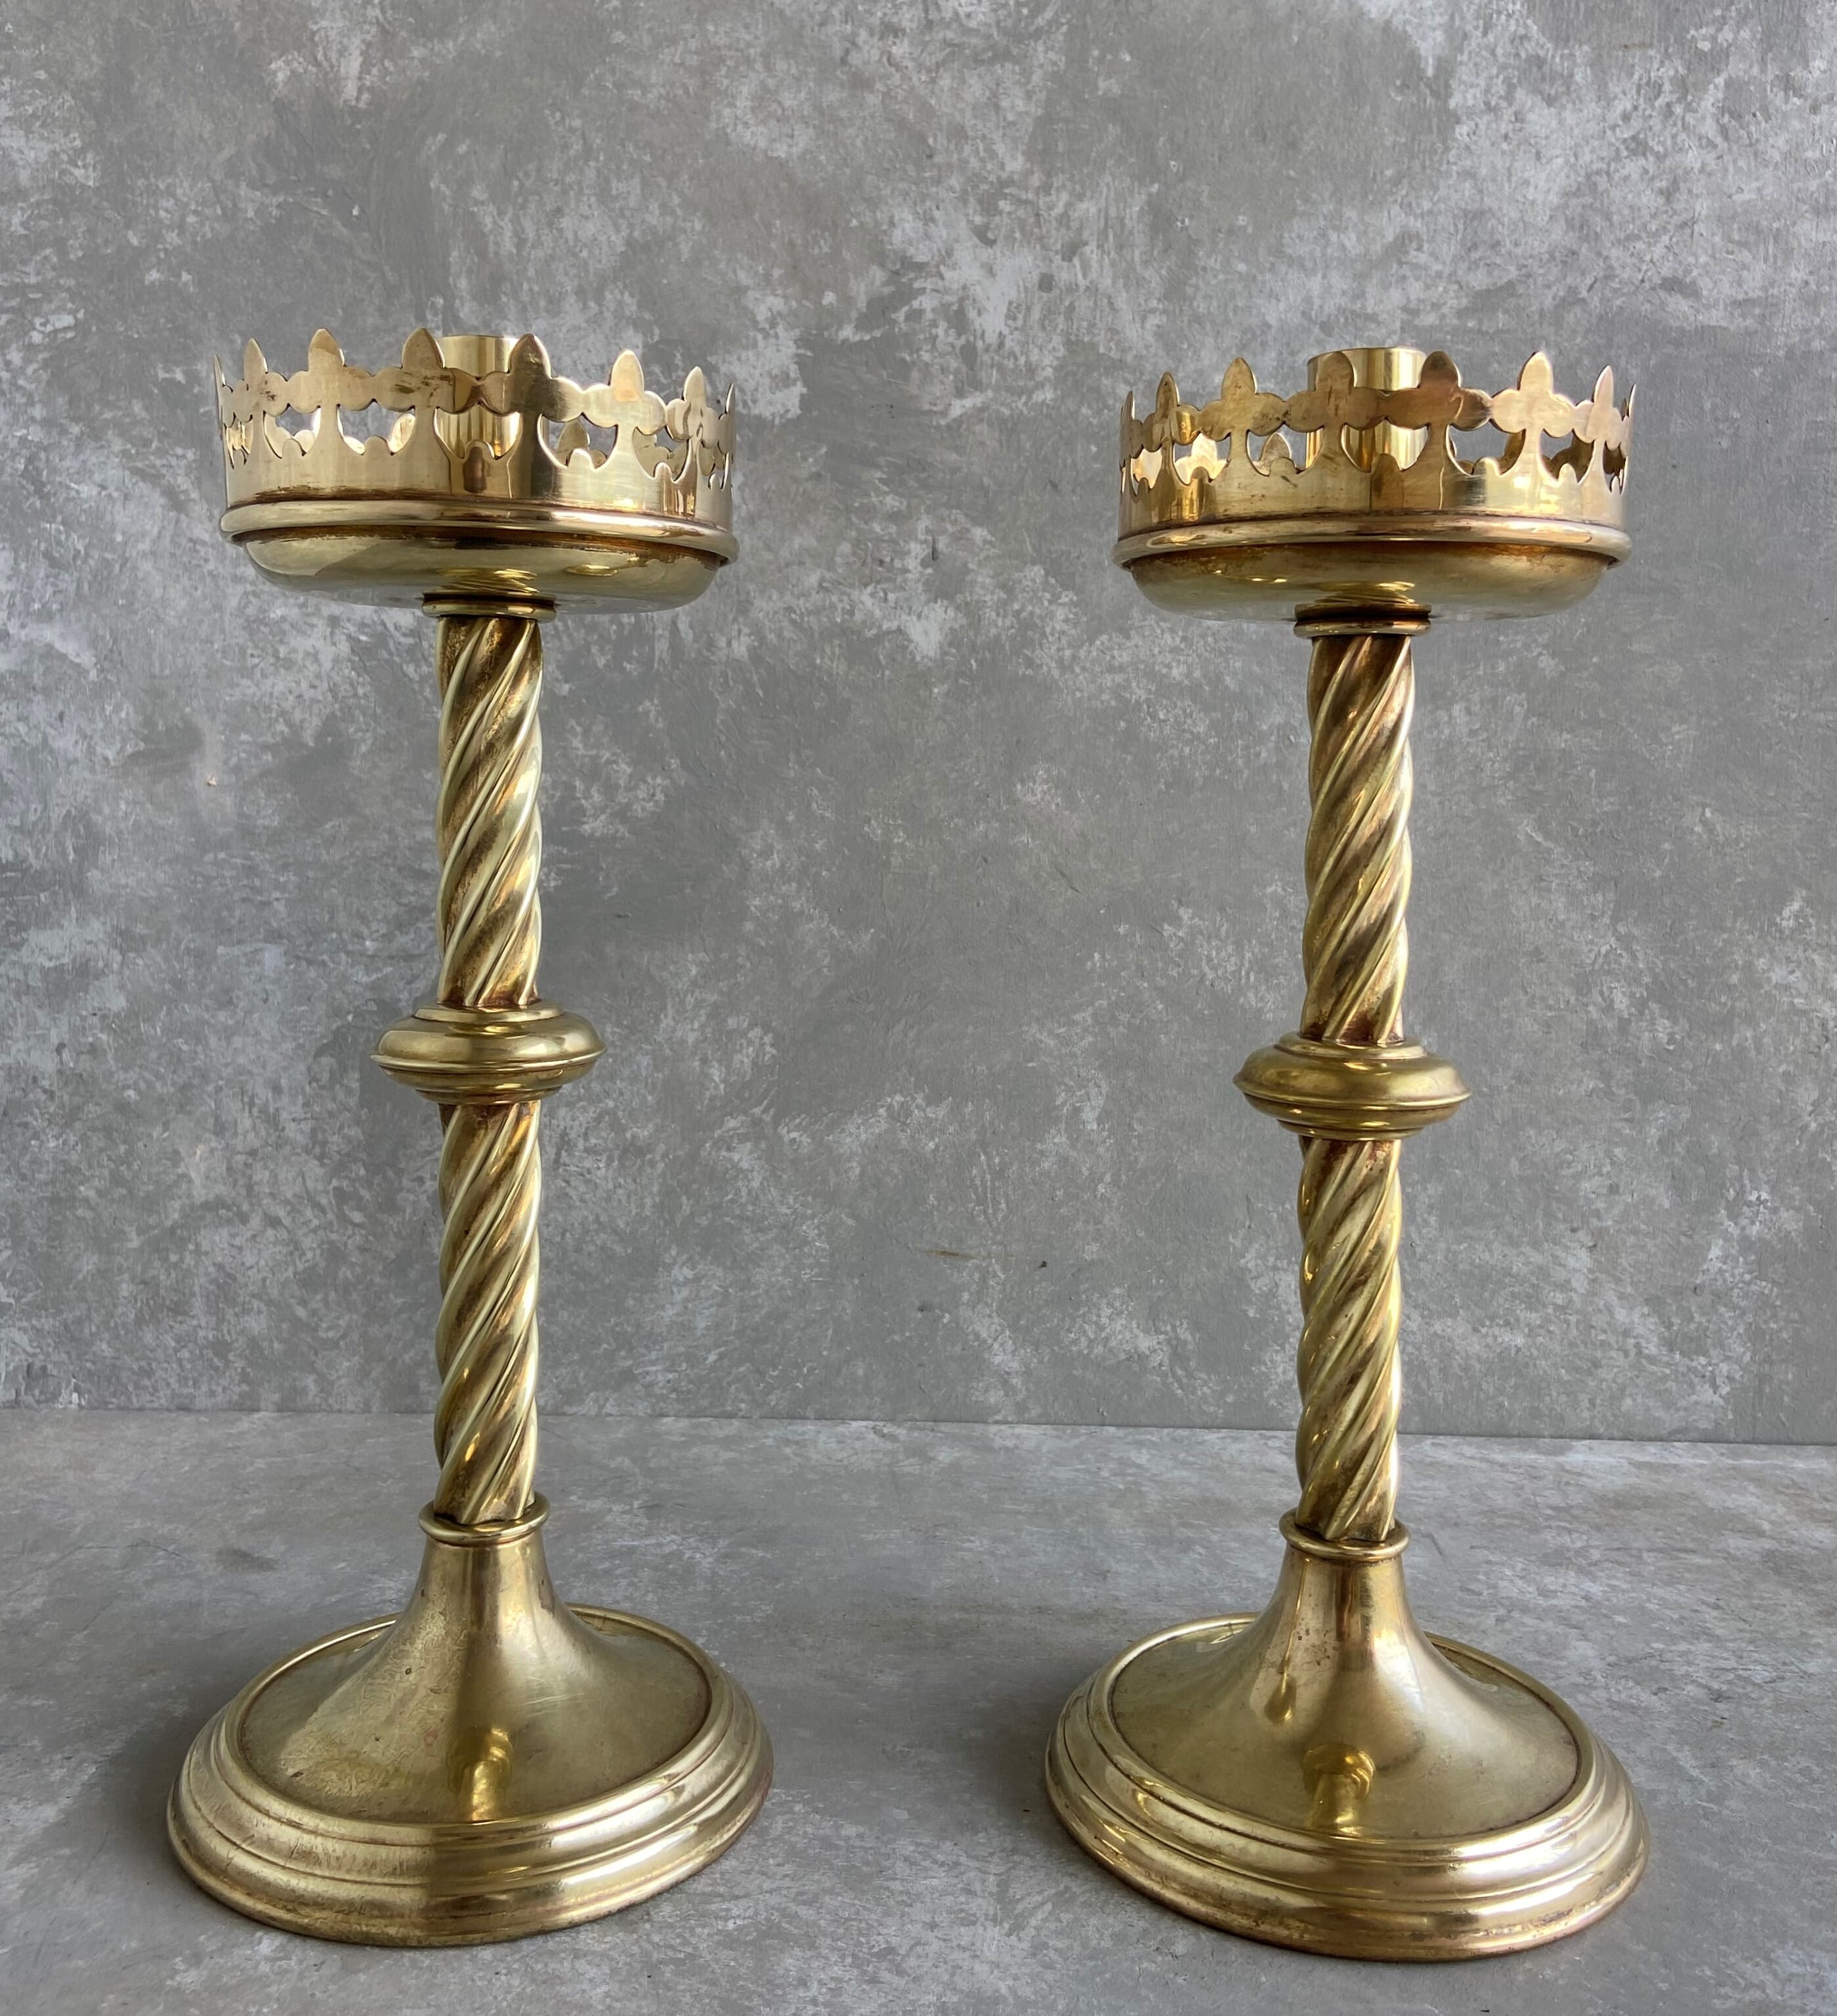 Pair of Rare Reclaimed Solid Brass Gothic Candlesticks